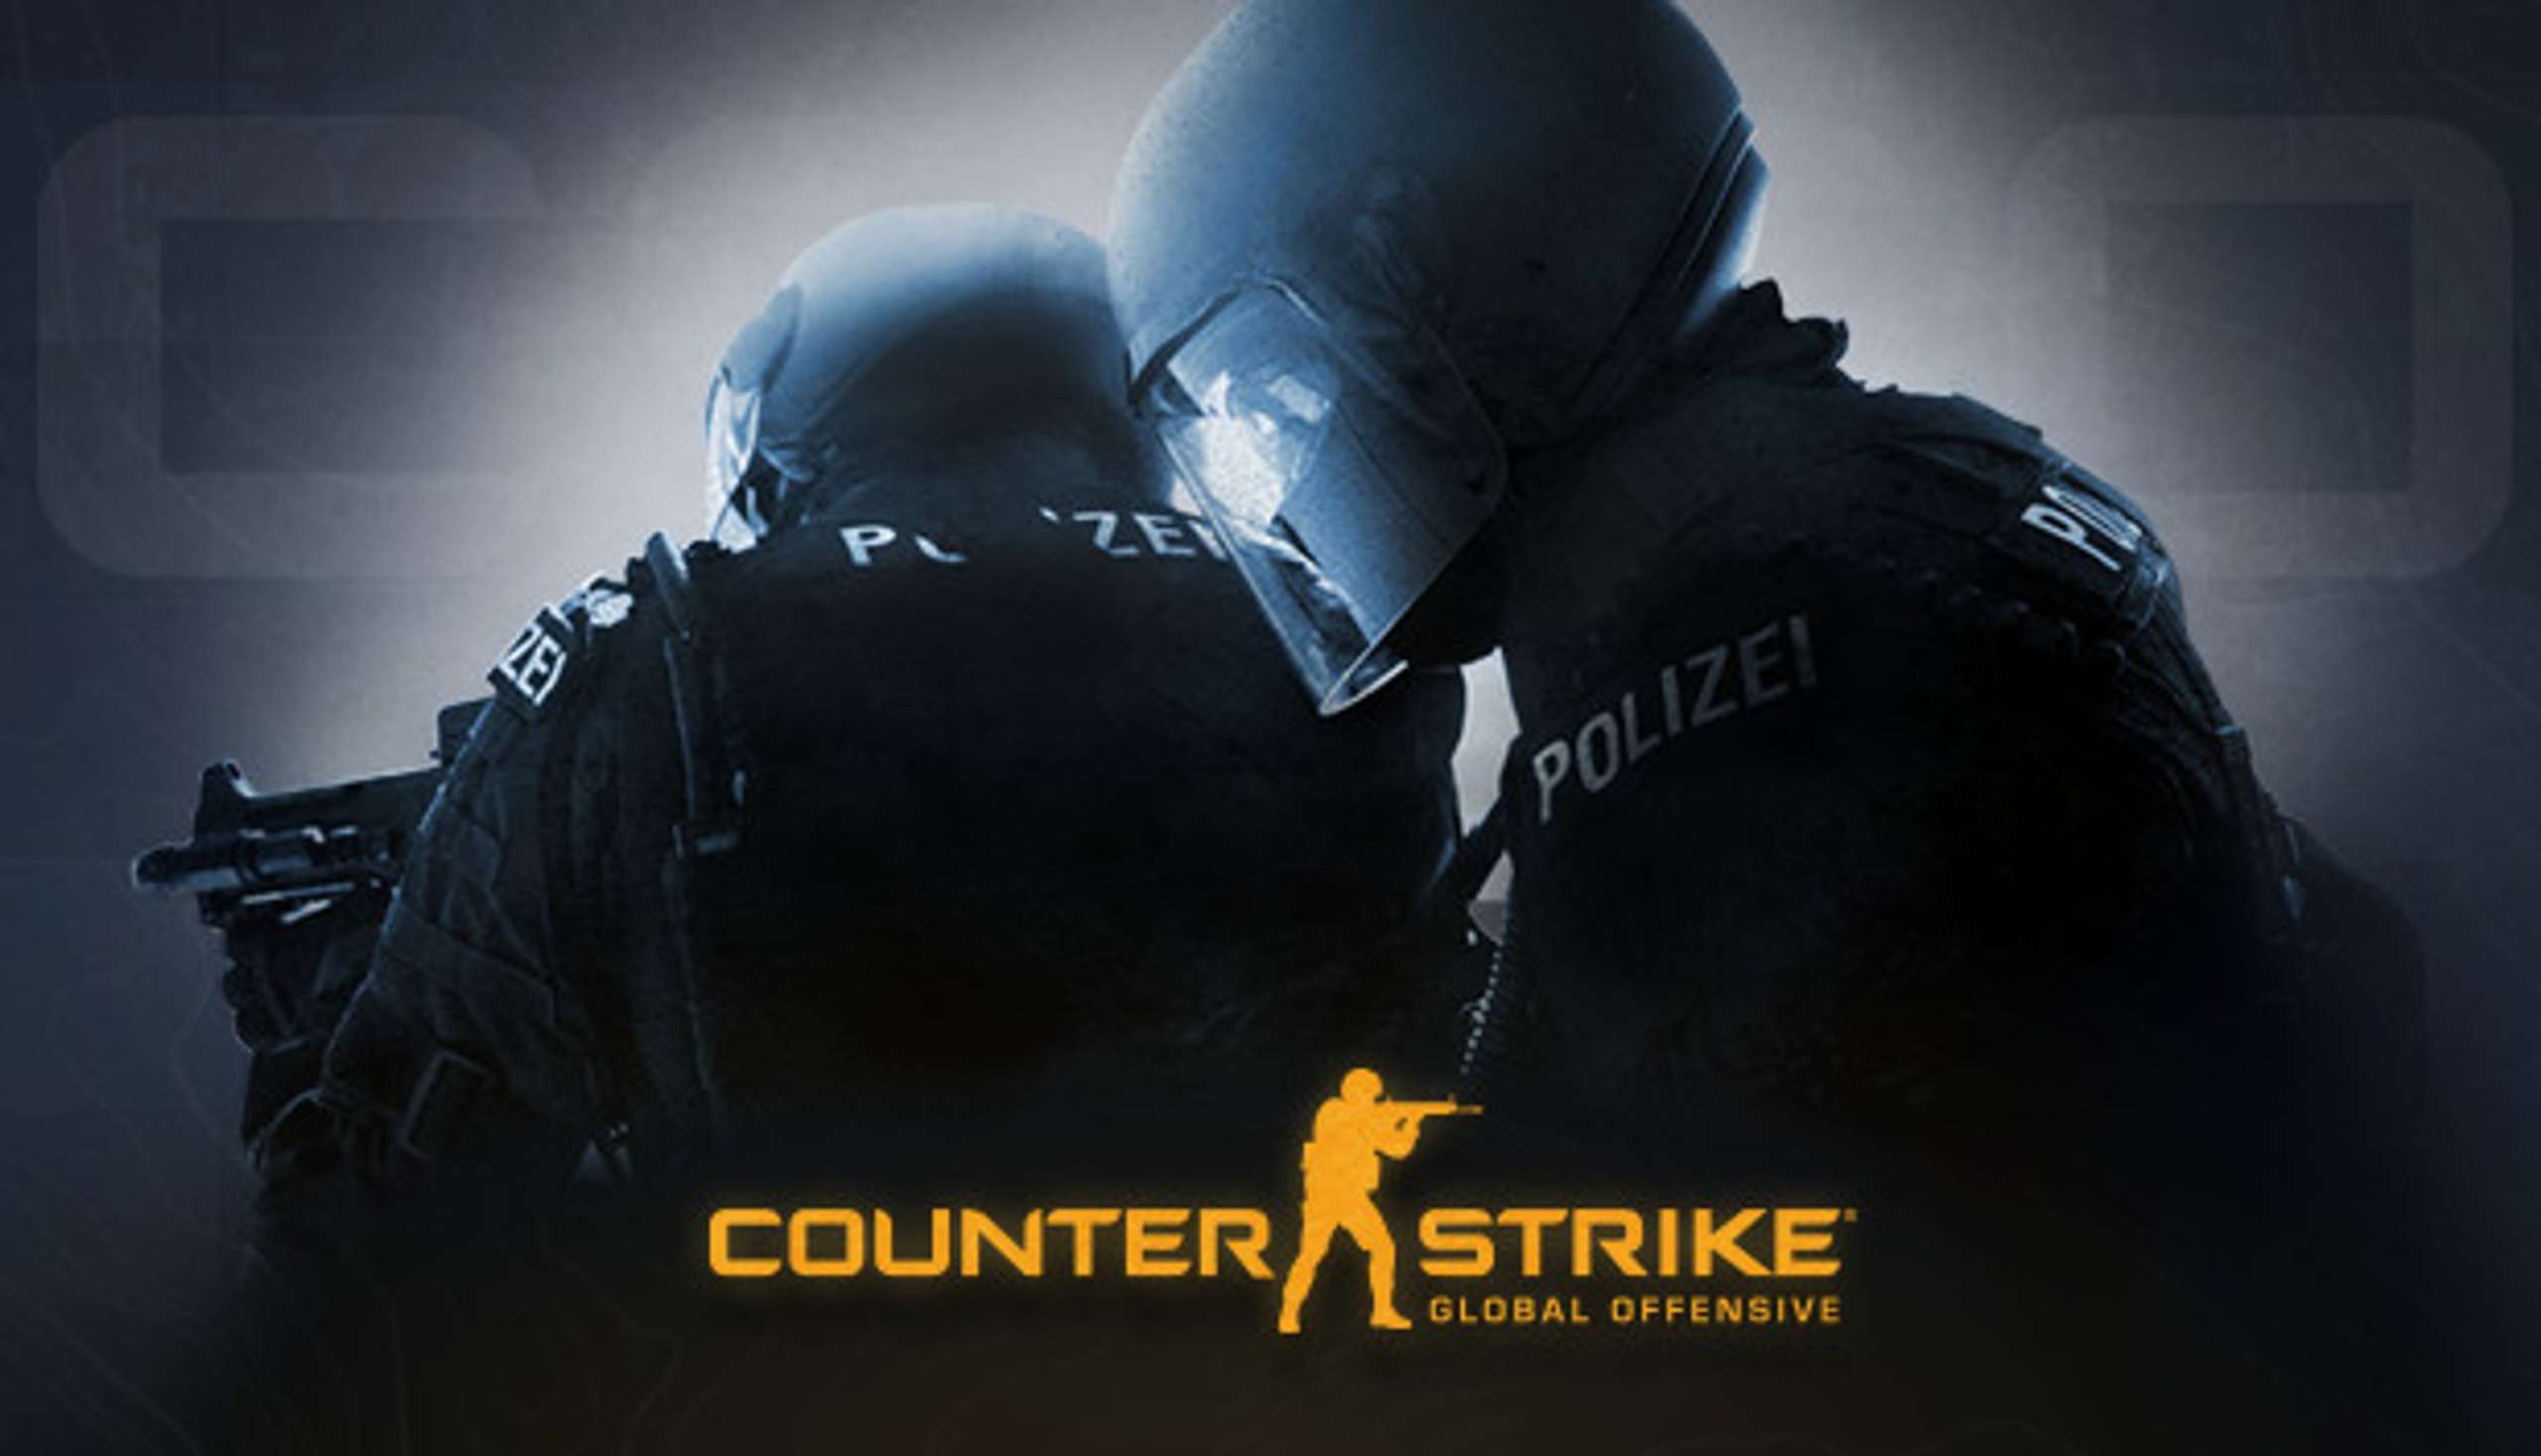 The Well-Known Door Stuck Video From Counter-Strike Has Been Altered Through Copyright Theft.